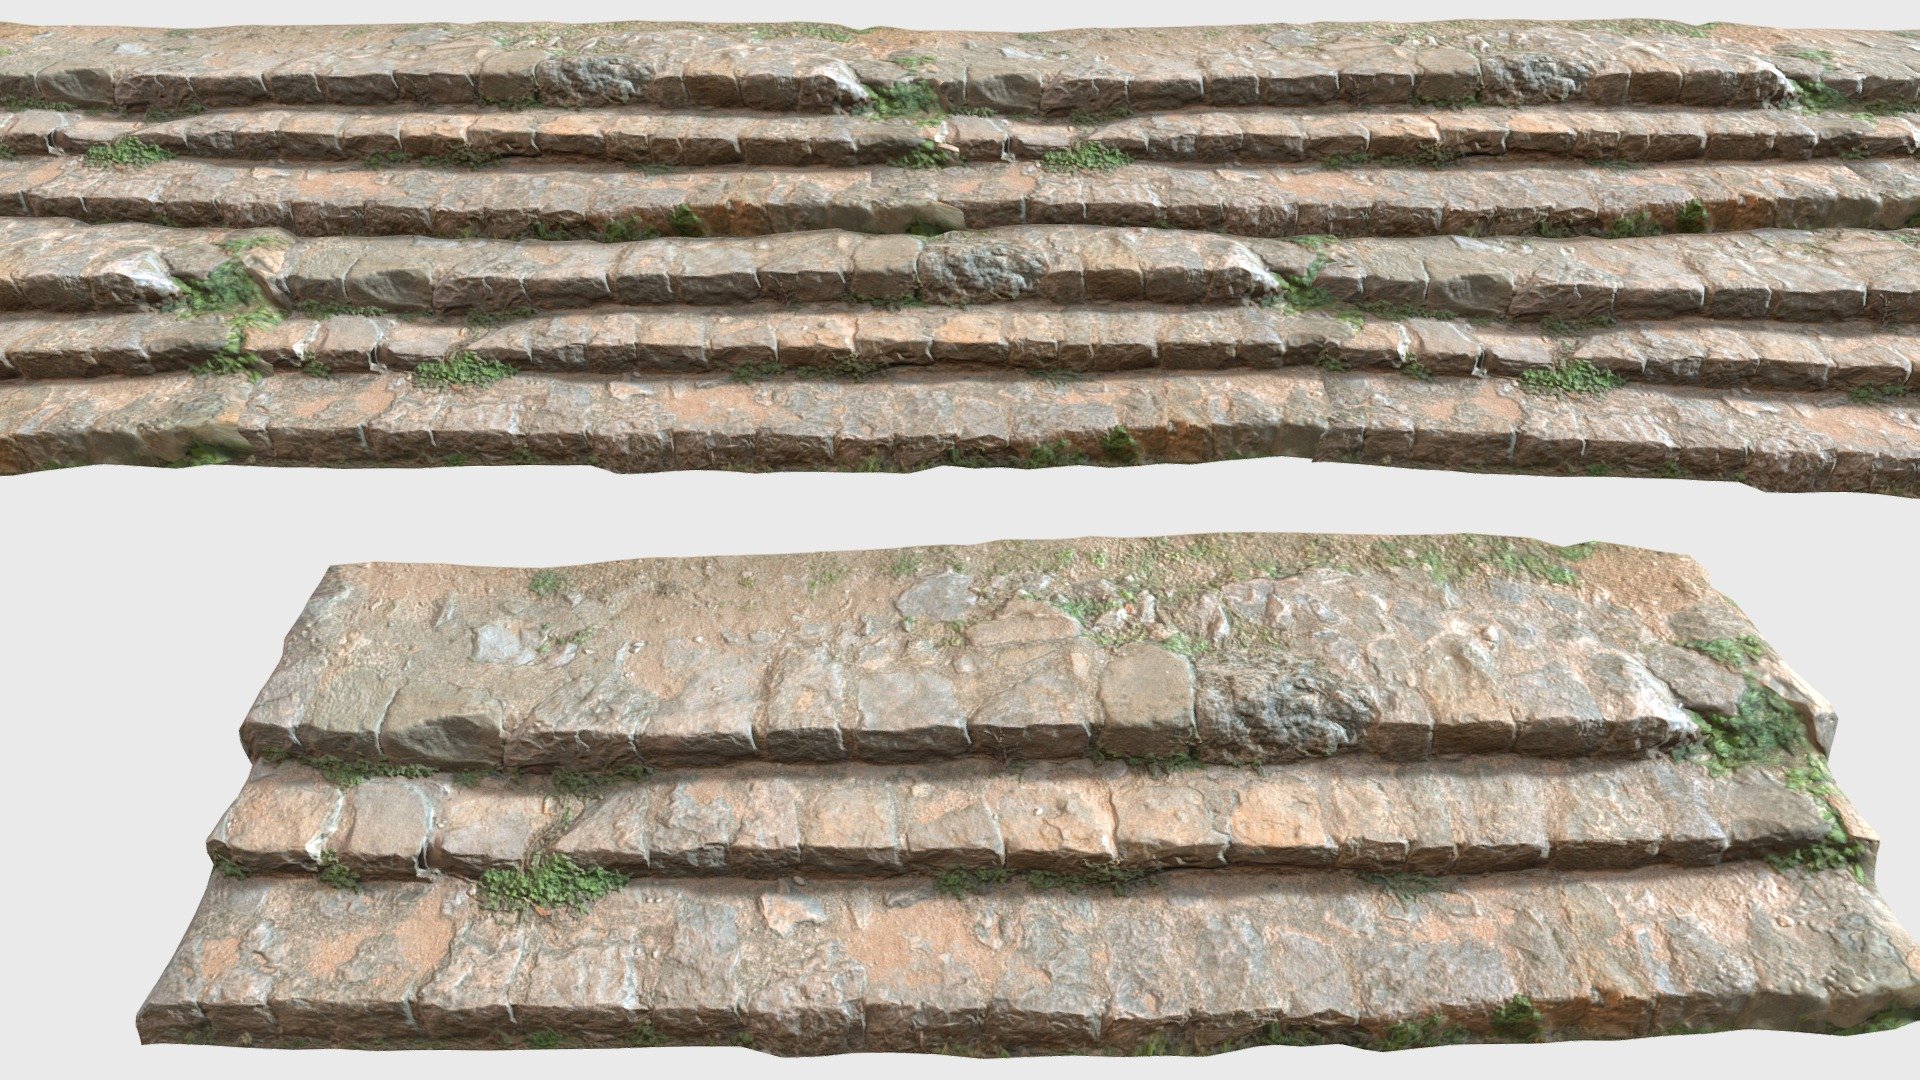 The stairs are scanned from an old abbey in the spanish Pyrenees. 

Fully processed 3D scans: reduced light information, color-matched, etc. 

Ready to use for all kind of CGI

8K Textures:



normal



albedo



roughness



Please let me know if something isn’t working as it should 3d model